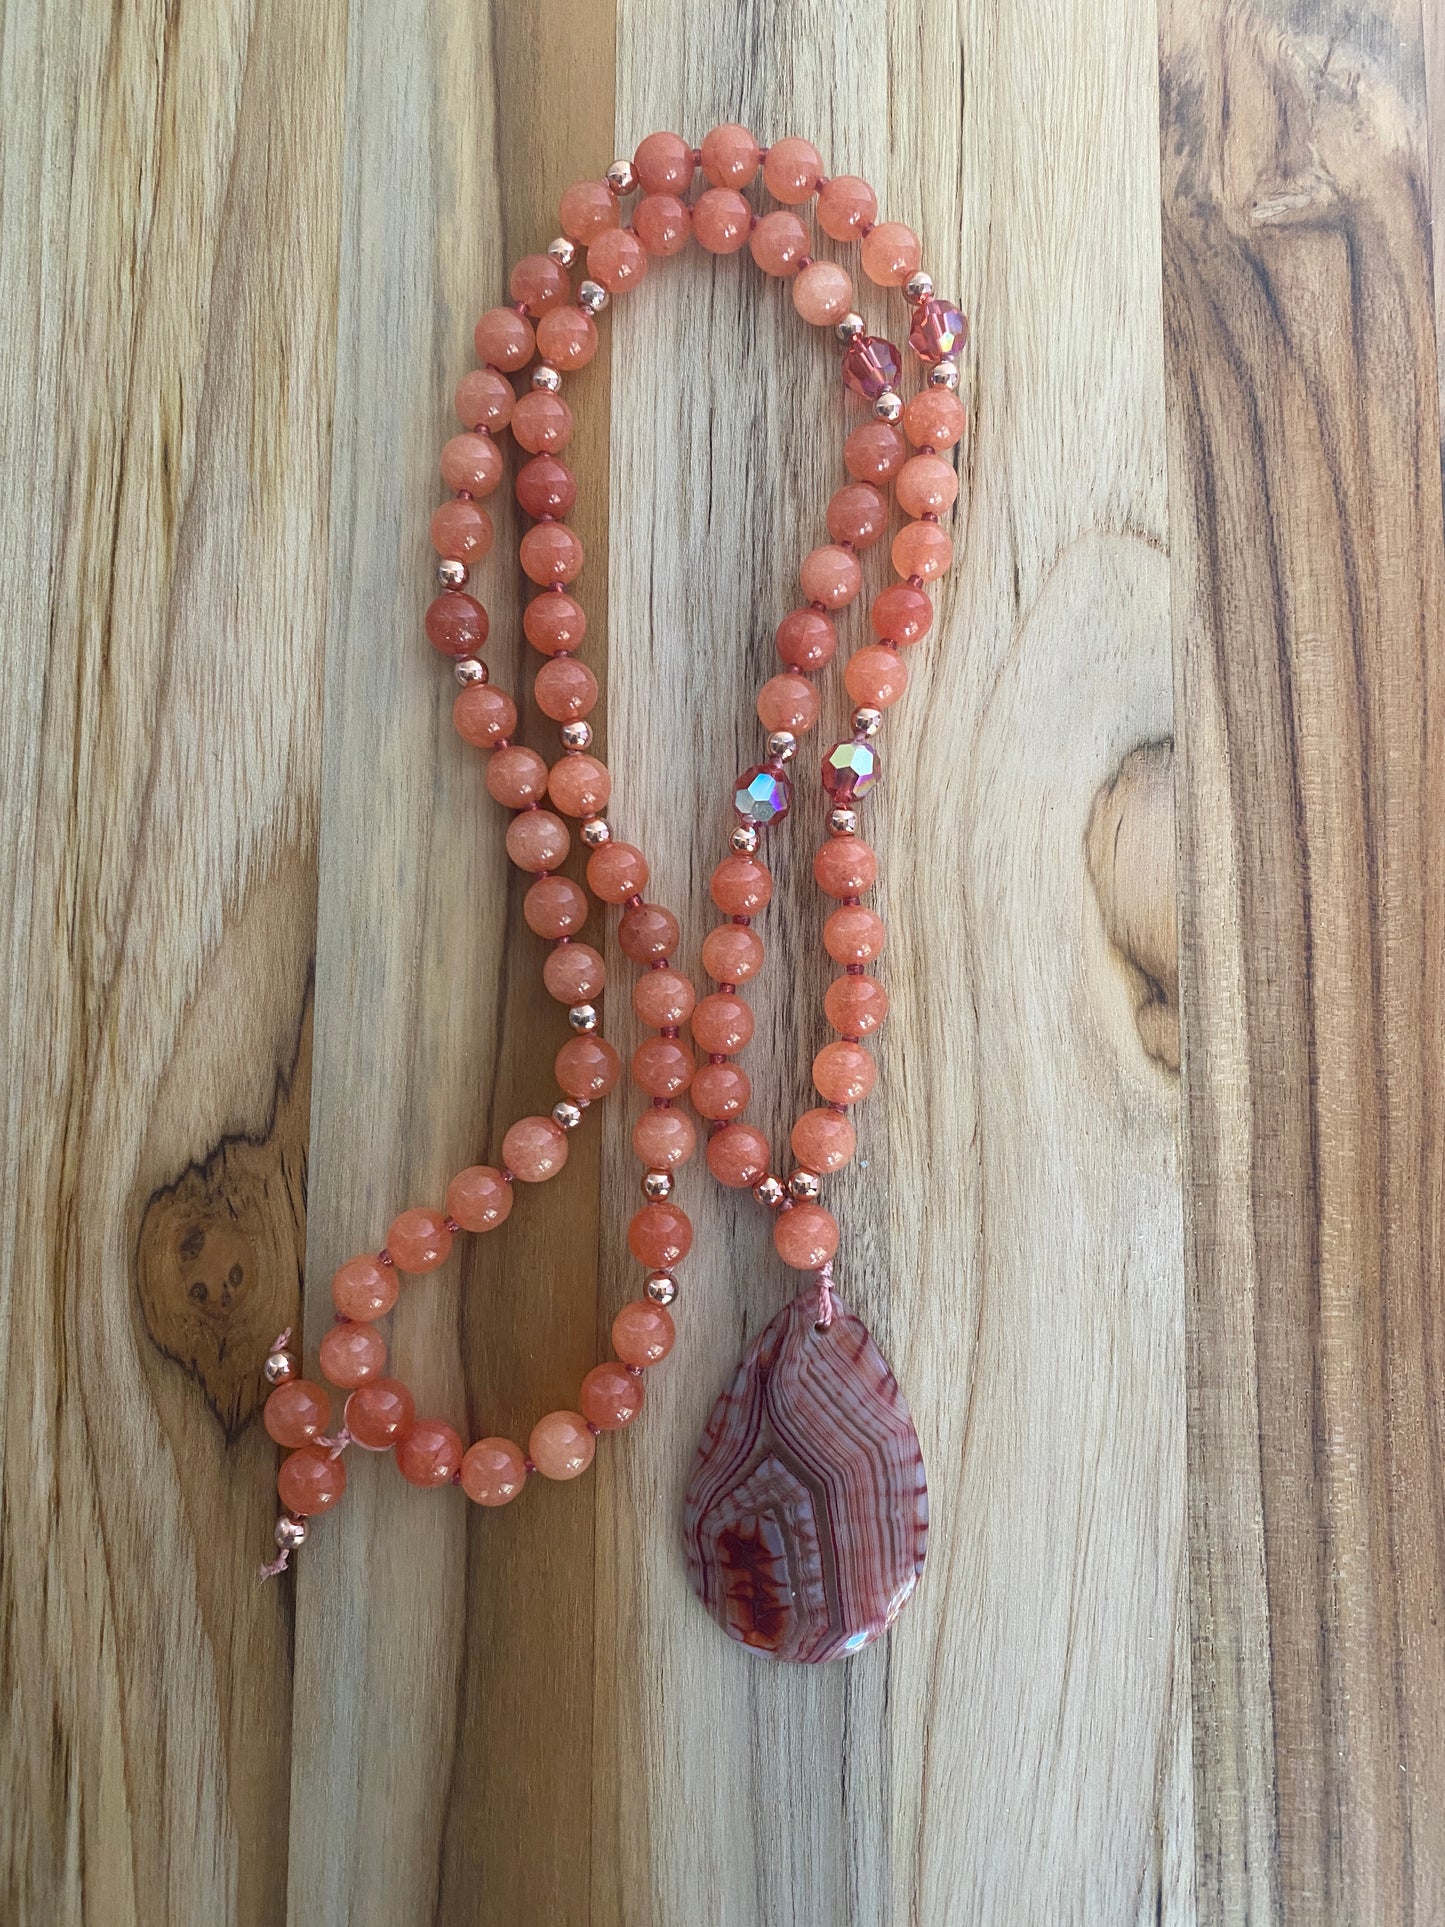 28" Long Stripes Agate Pendant Necklace with Orange Jade & Crystal Beads